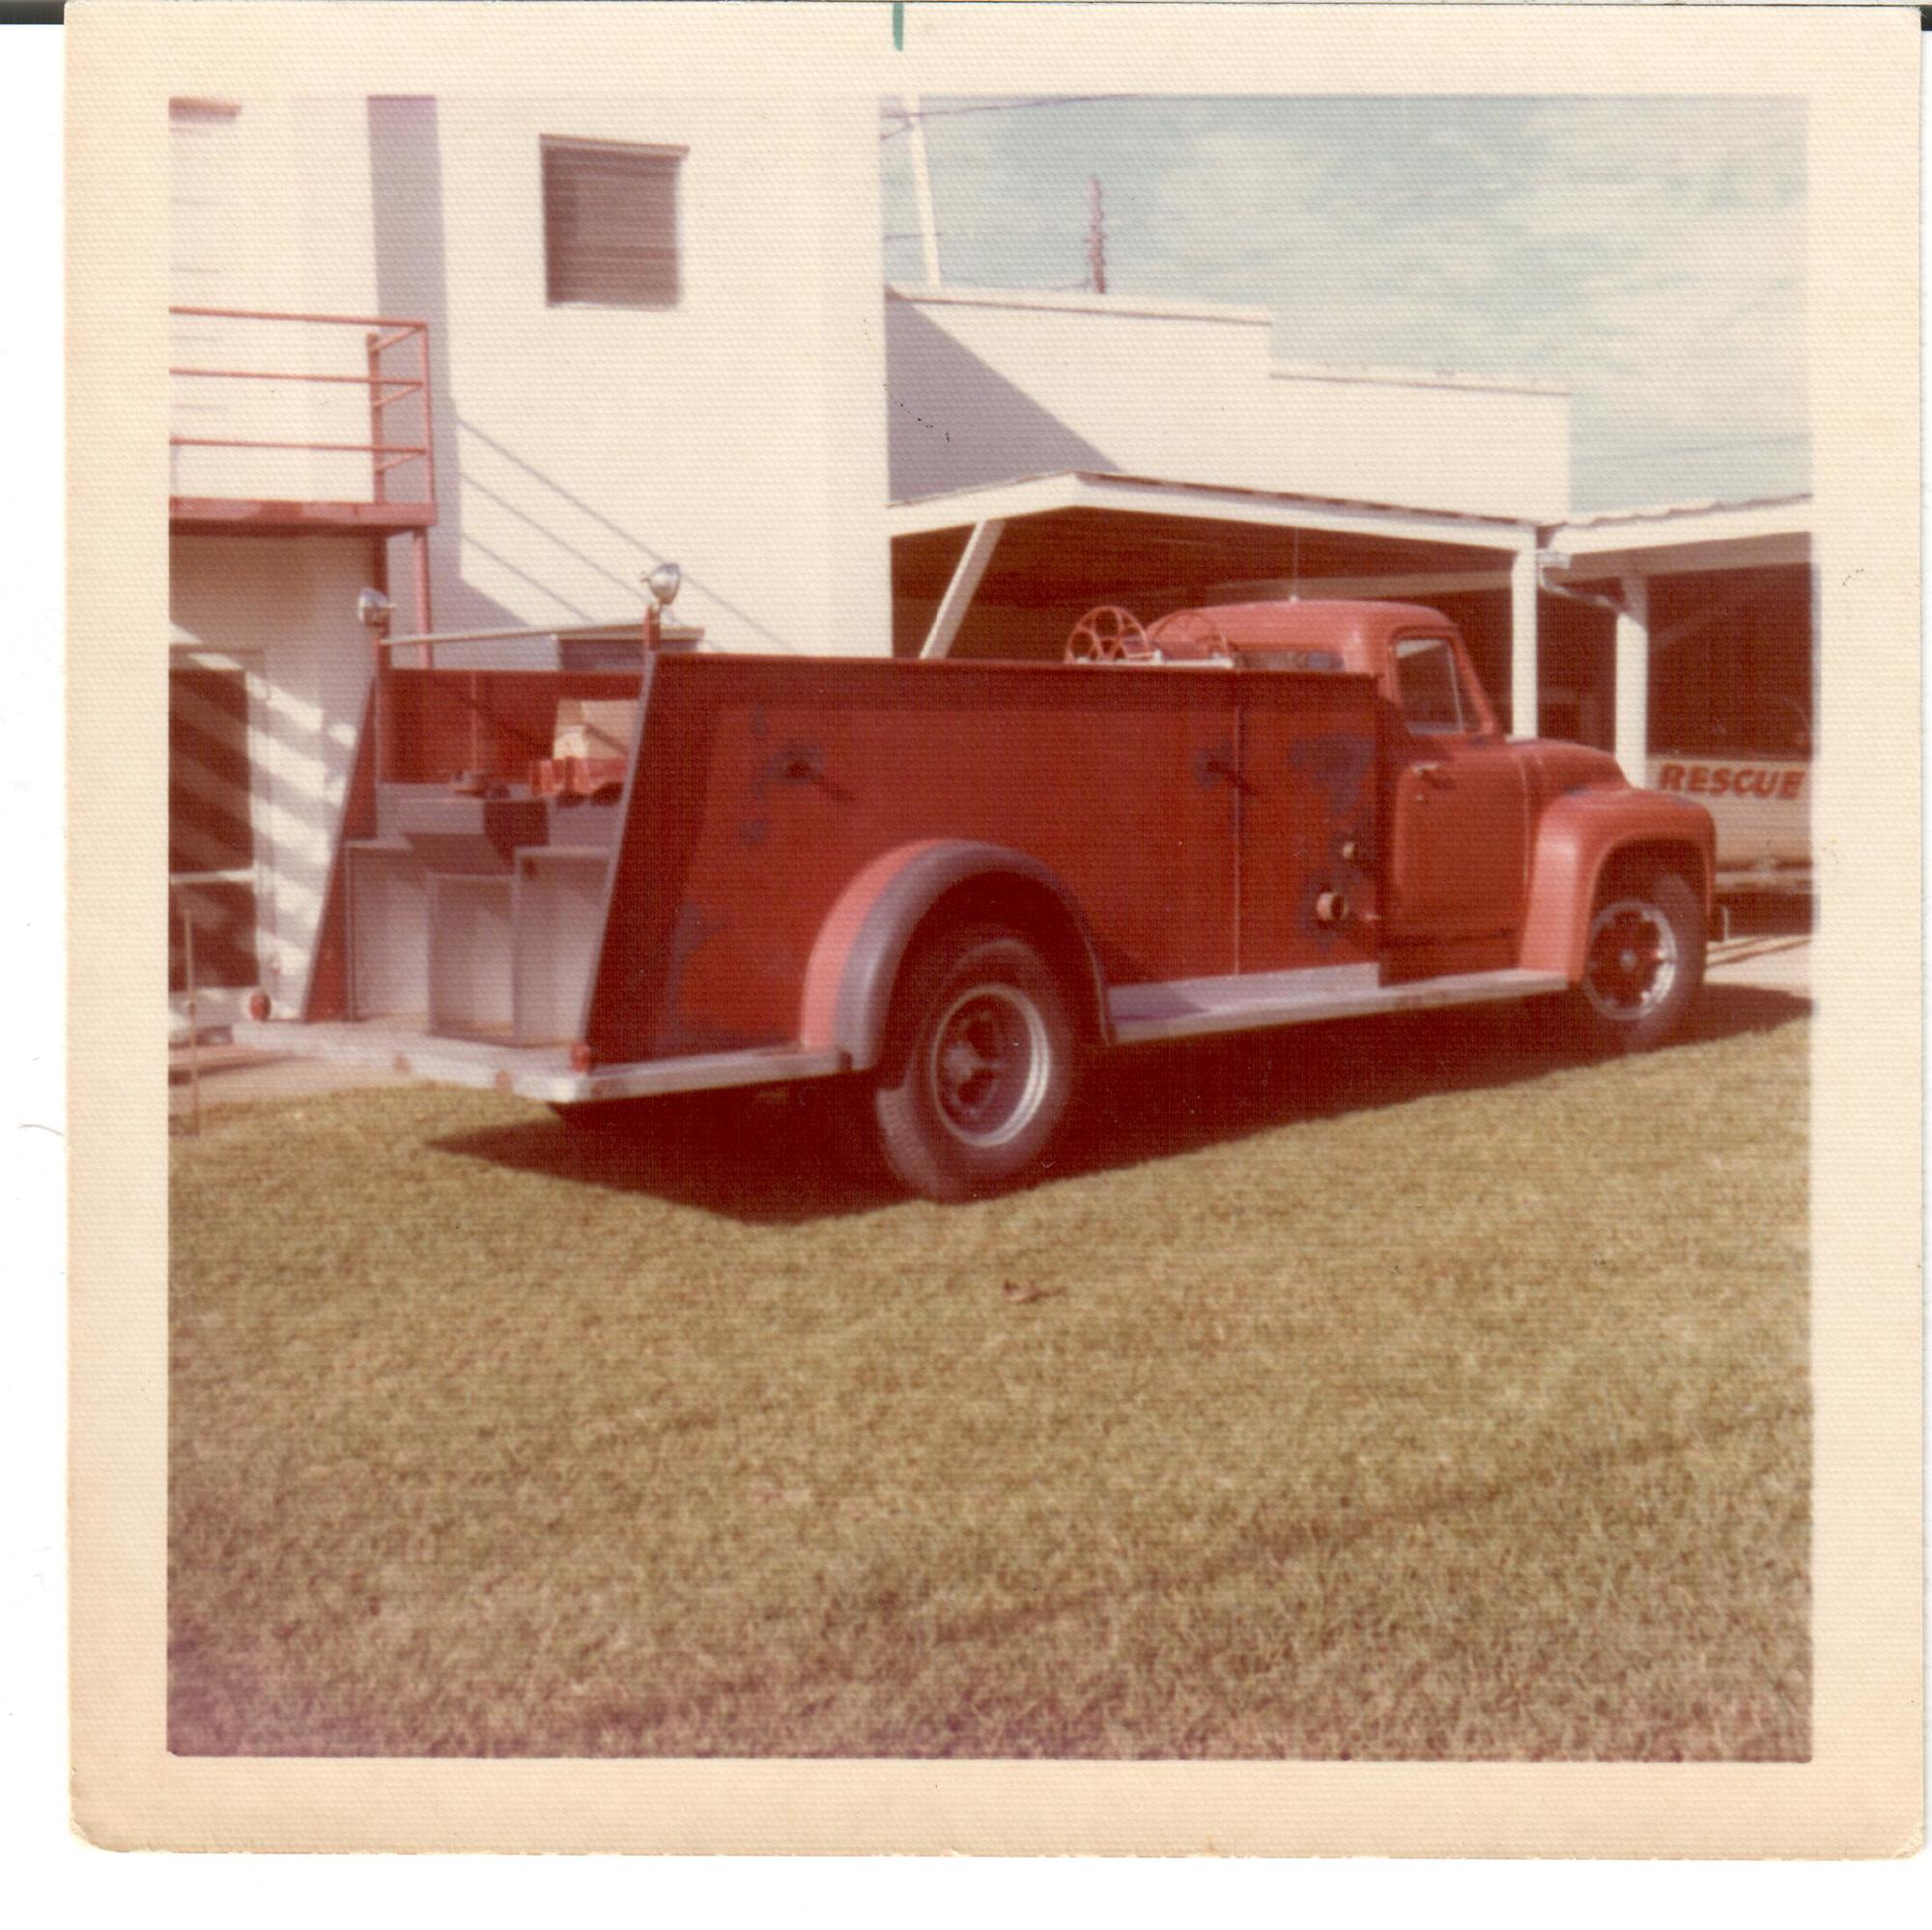 The American La France fire engine originally was red but later received a bright yellow coat of paint.